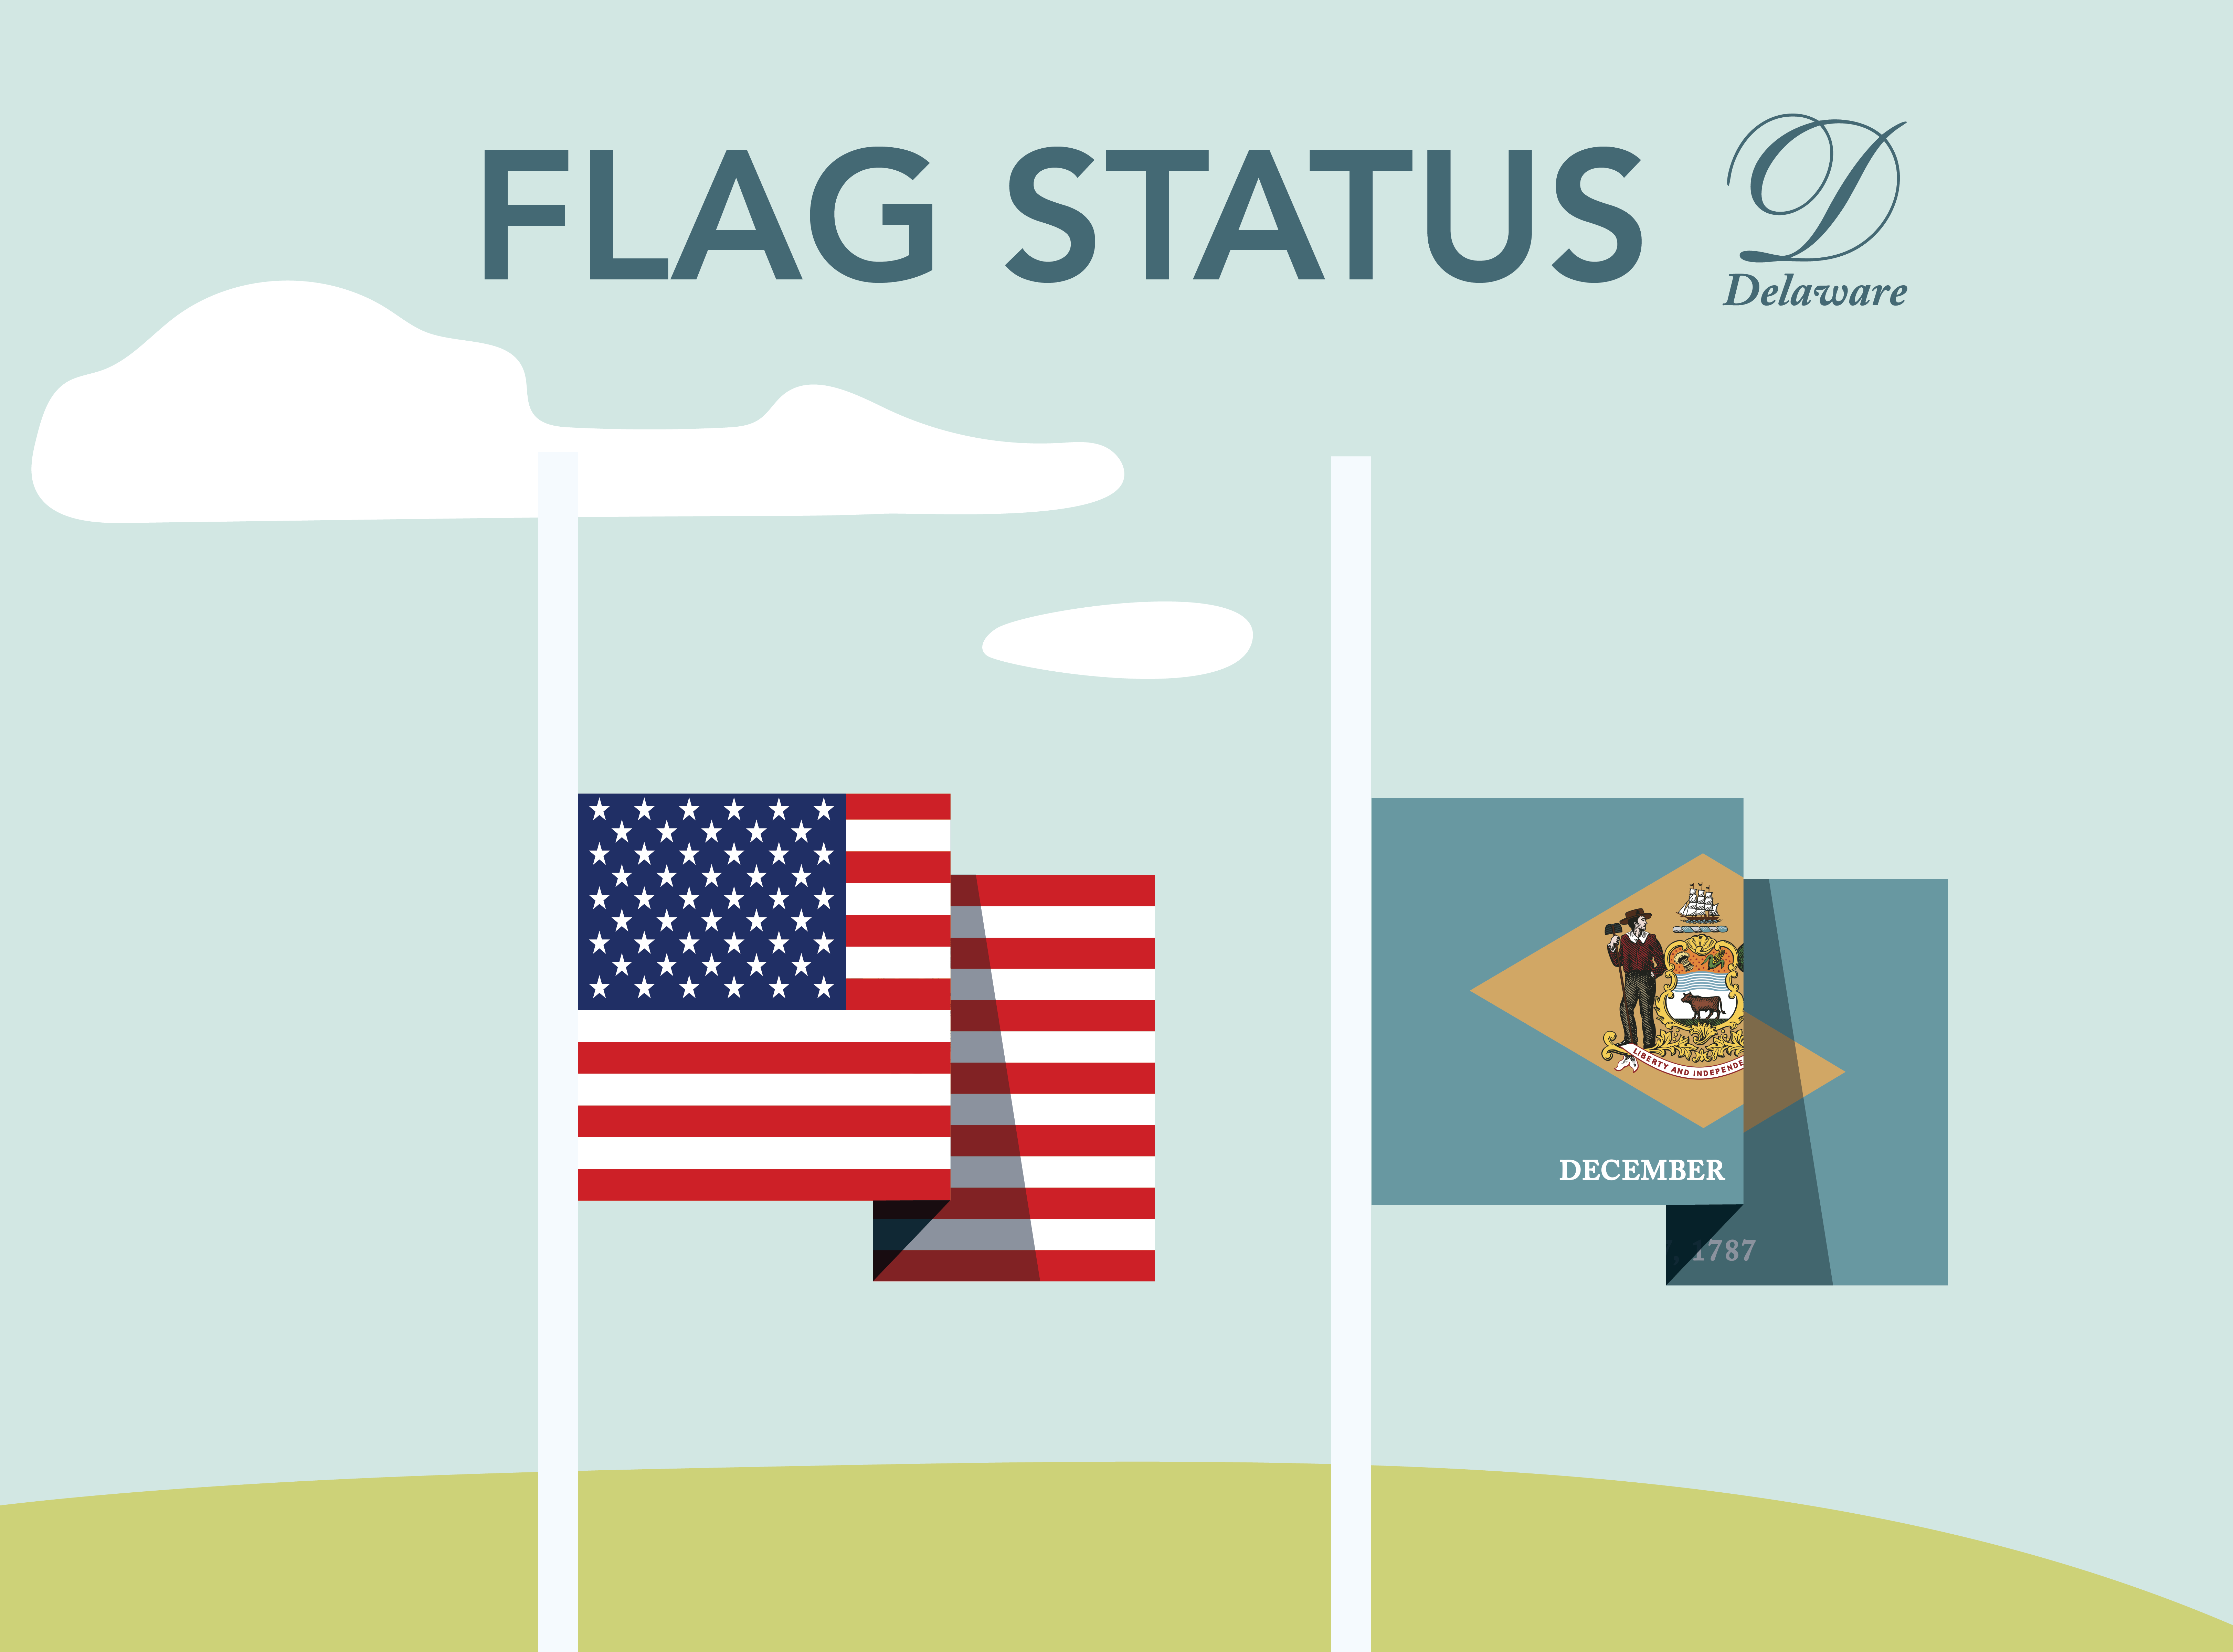 Illustrative American and Delaware State Flags at Half Staff to represent Flag Status